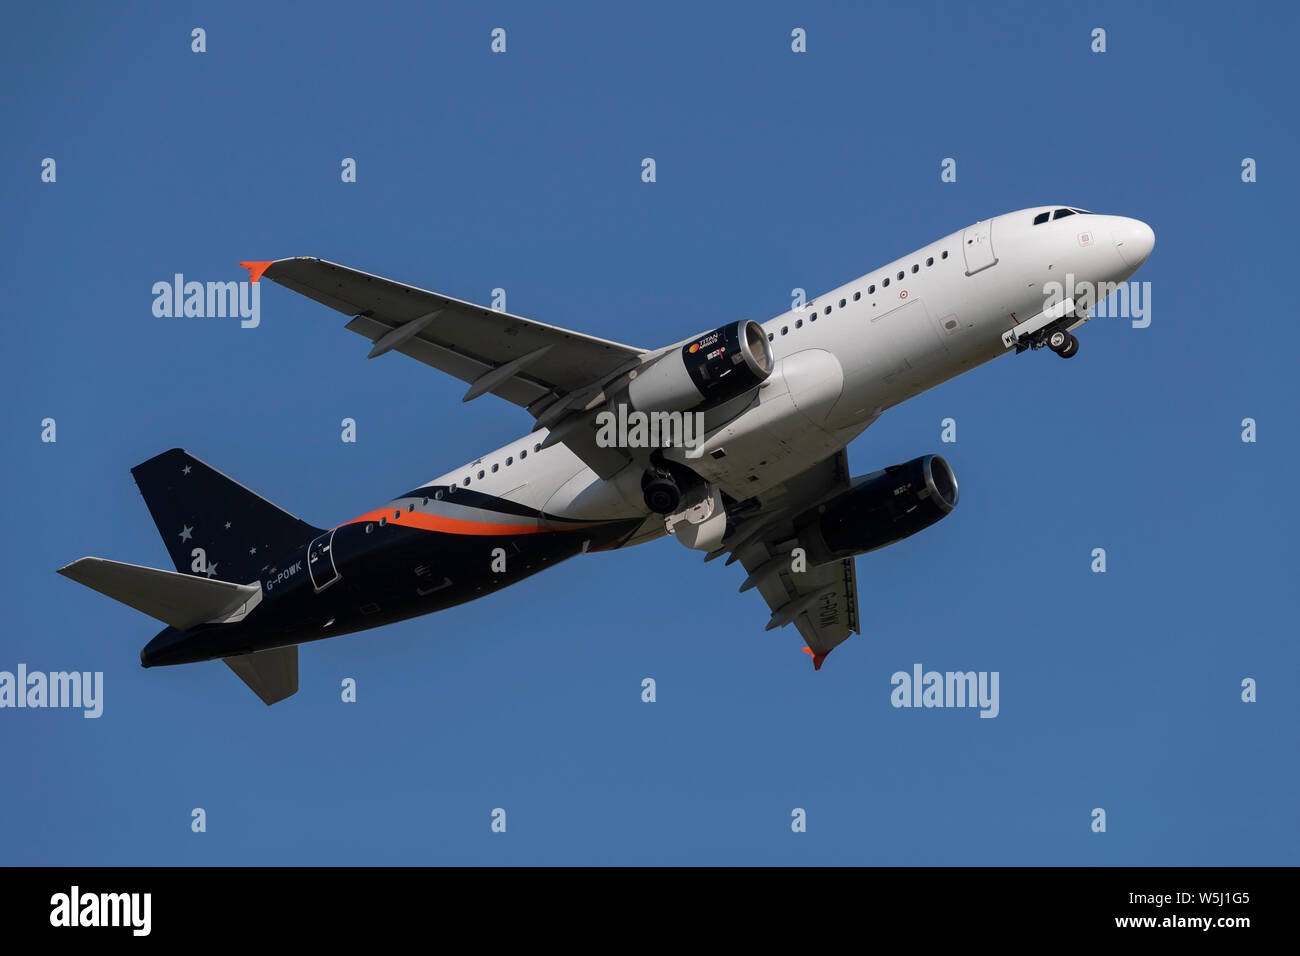 A Titan Airways Airbus A320-200 takes off from Manchester International Airport (Editorial use only) Stock Photo